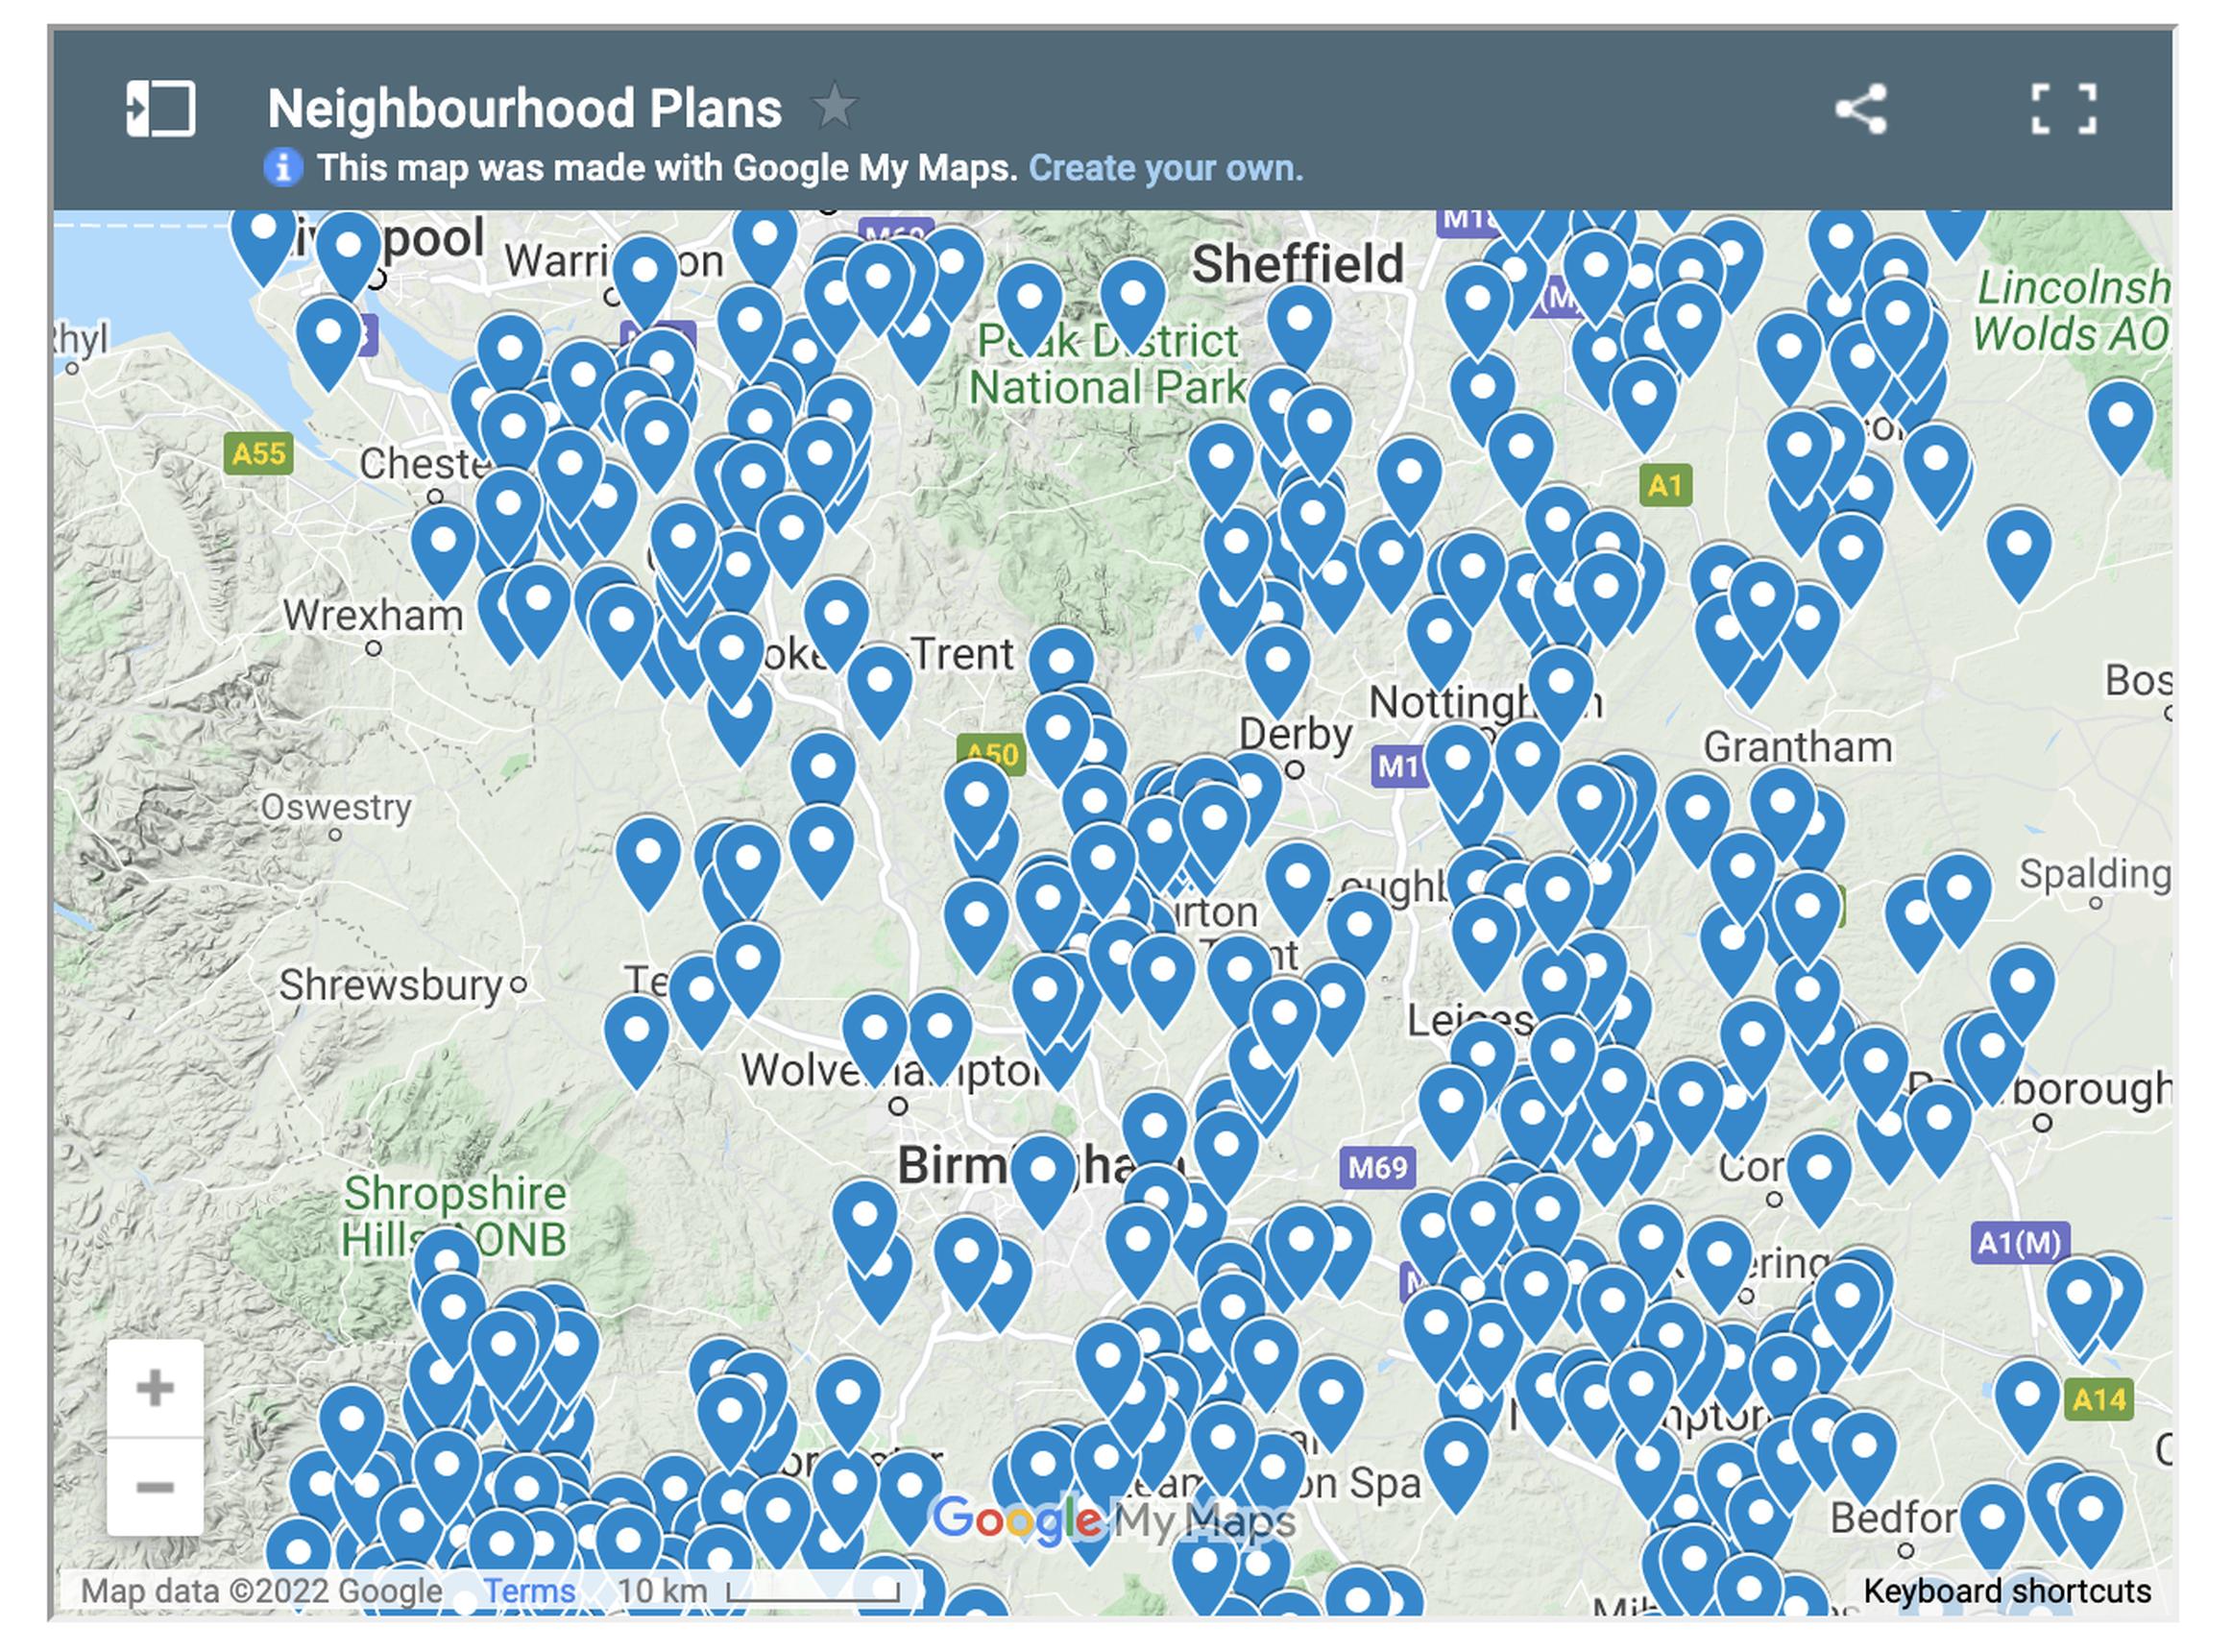 Over 1,200 communities across England have completed a neighbourhood plan, and more than 2,800 have started the neighbourhood planning process. Look them up on Ed Dade`s  interactive map: https://www.neighbourhood-planning.co.uk/services/interactive-neighbourhood-plan-map/